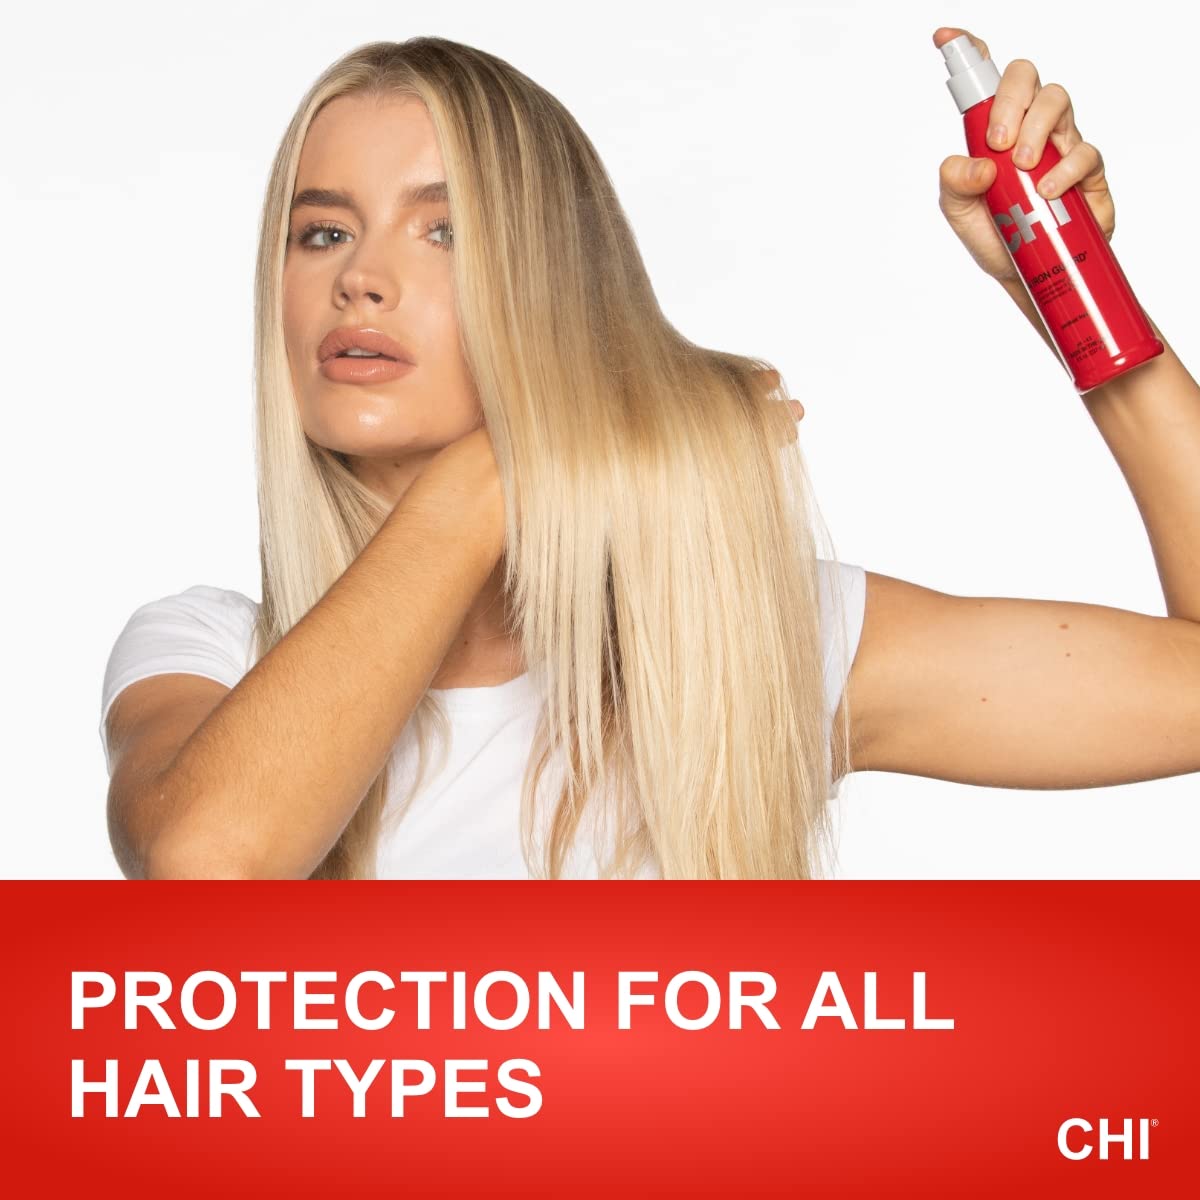 CHI 44 Iron Guard Thermal Protection Spray, Clear, 8 Fl Oz